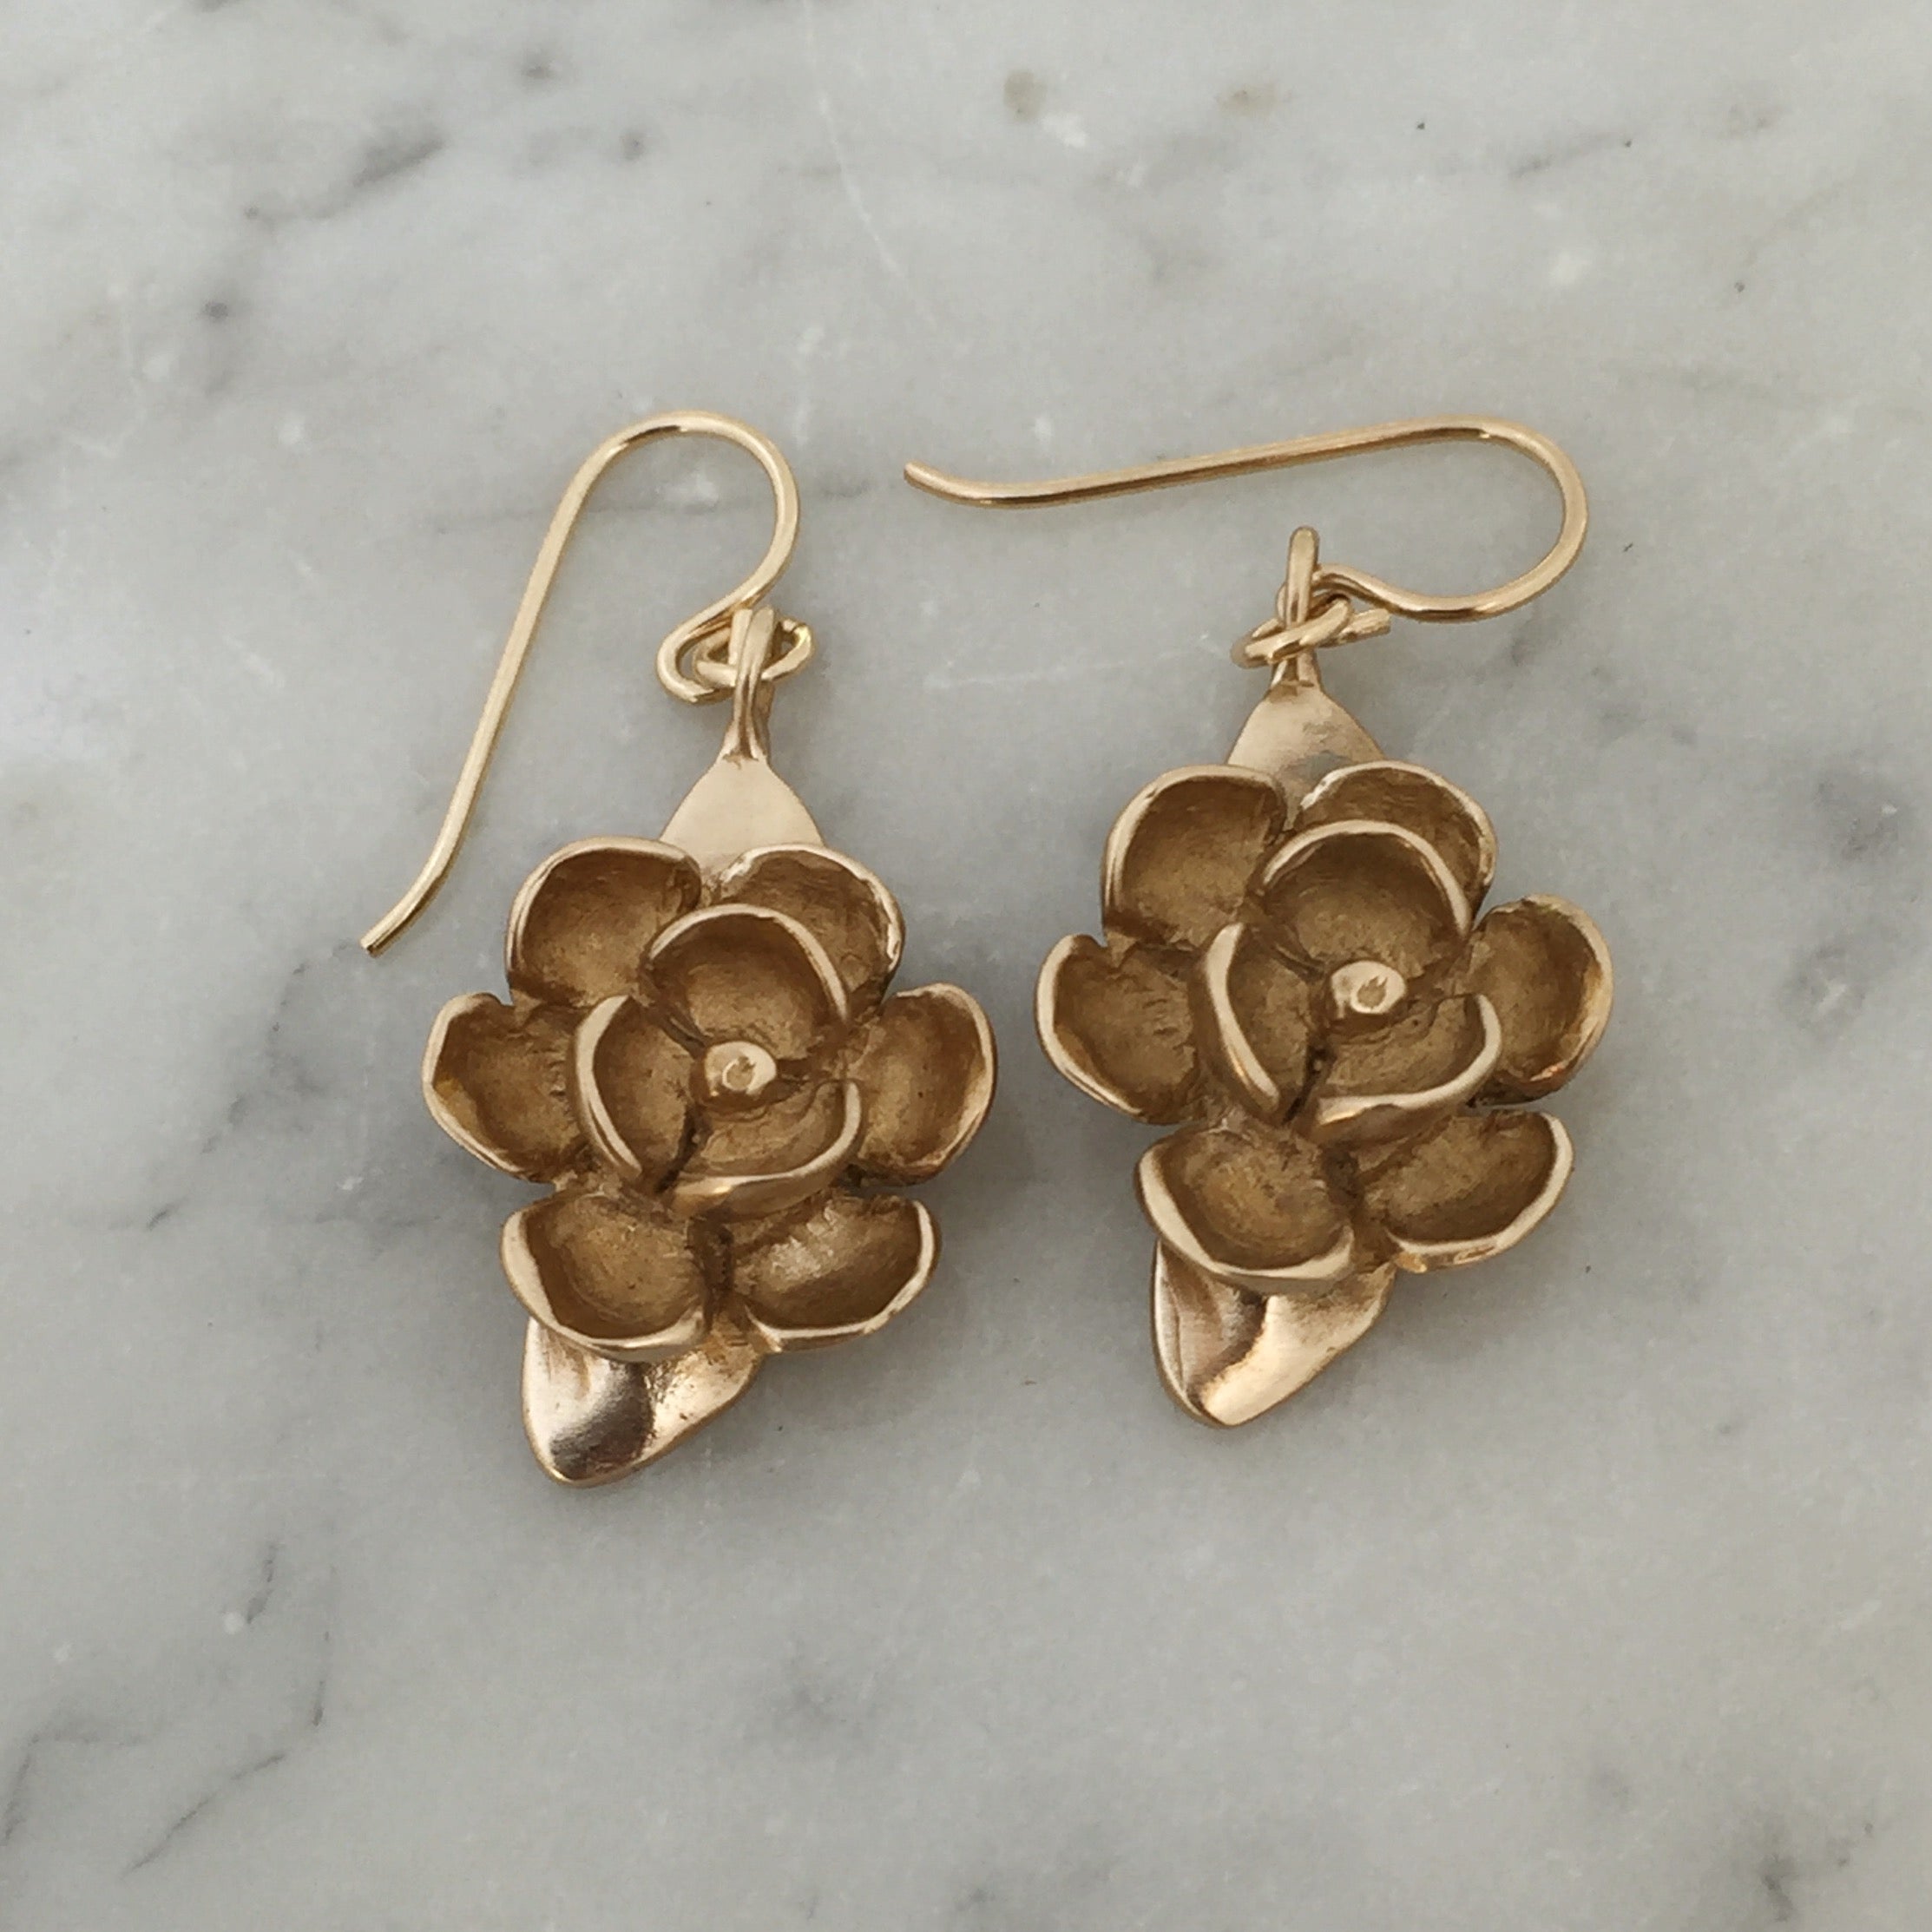 Make your own beautiful brass earrings! - Gathered